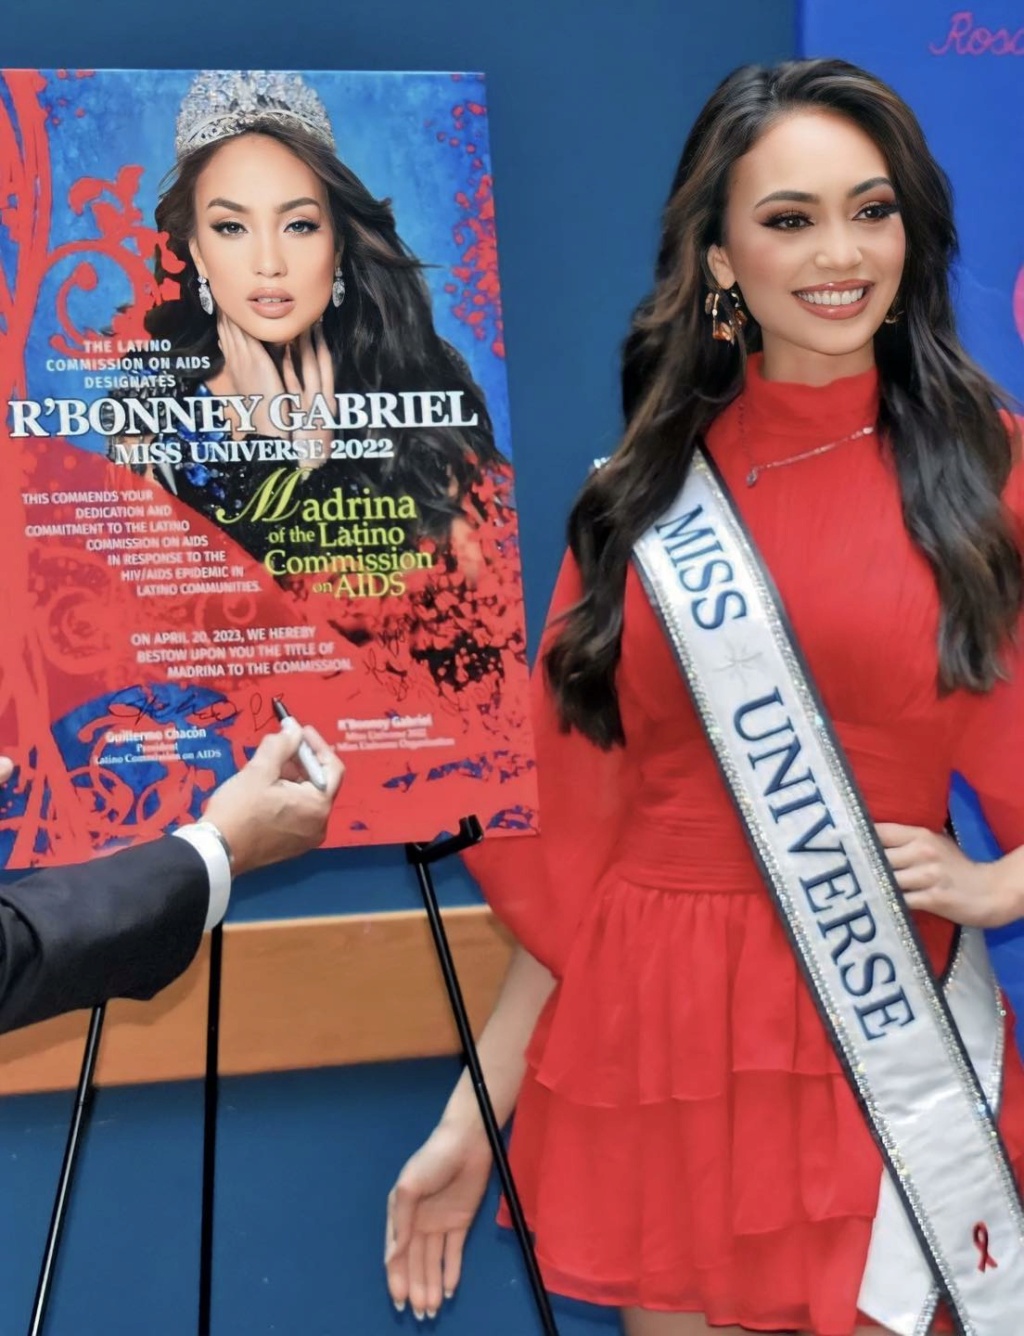 ♔ The Official Thread Of Miss Universe 2022 ® R'Bonney Gabriel of USA ♔ - Page 4 34419910